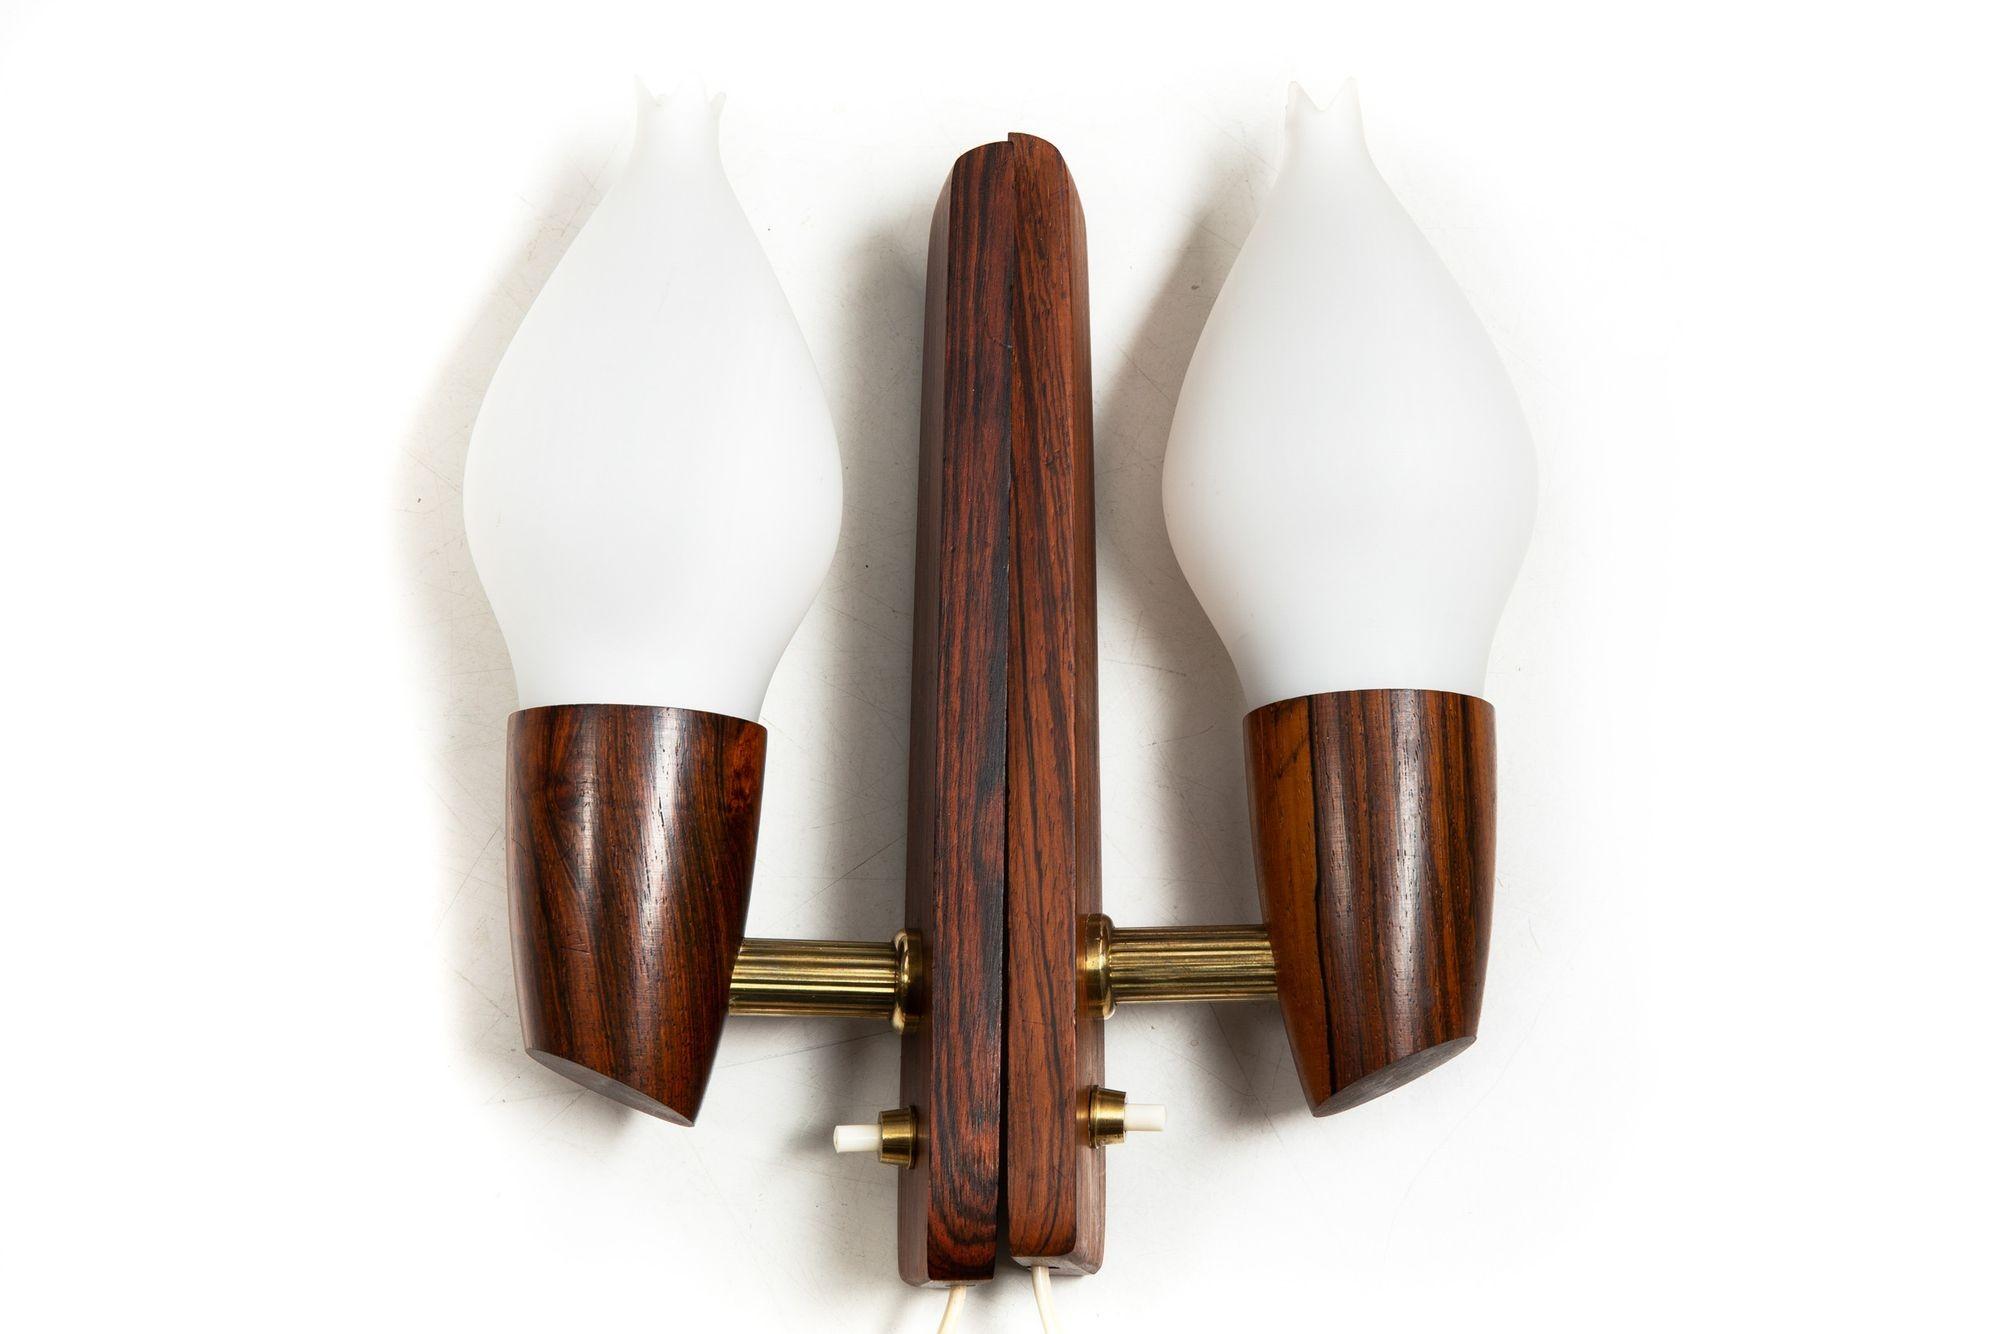 Pair of Danish Modern Rosewood Wall Sconces by Vitrika circa 1970s In Good Condition For Sale In Shippensburg, PA